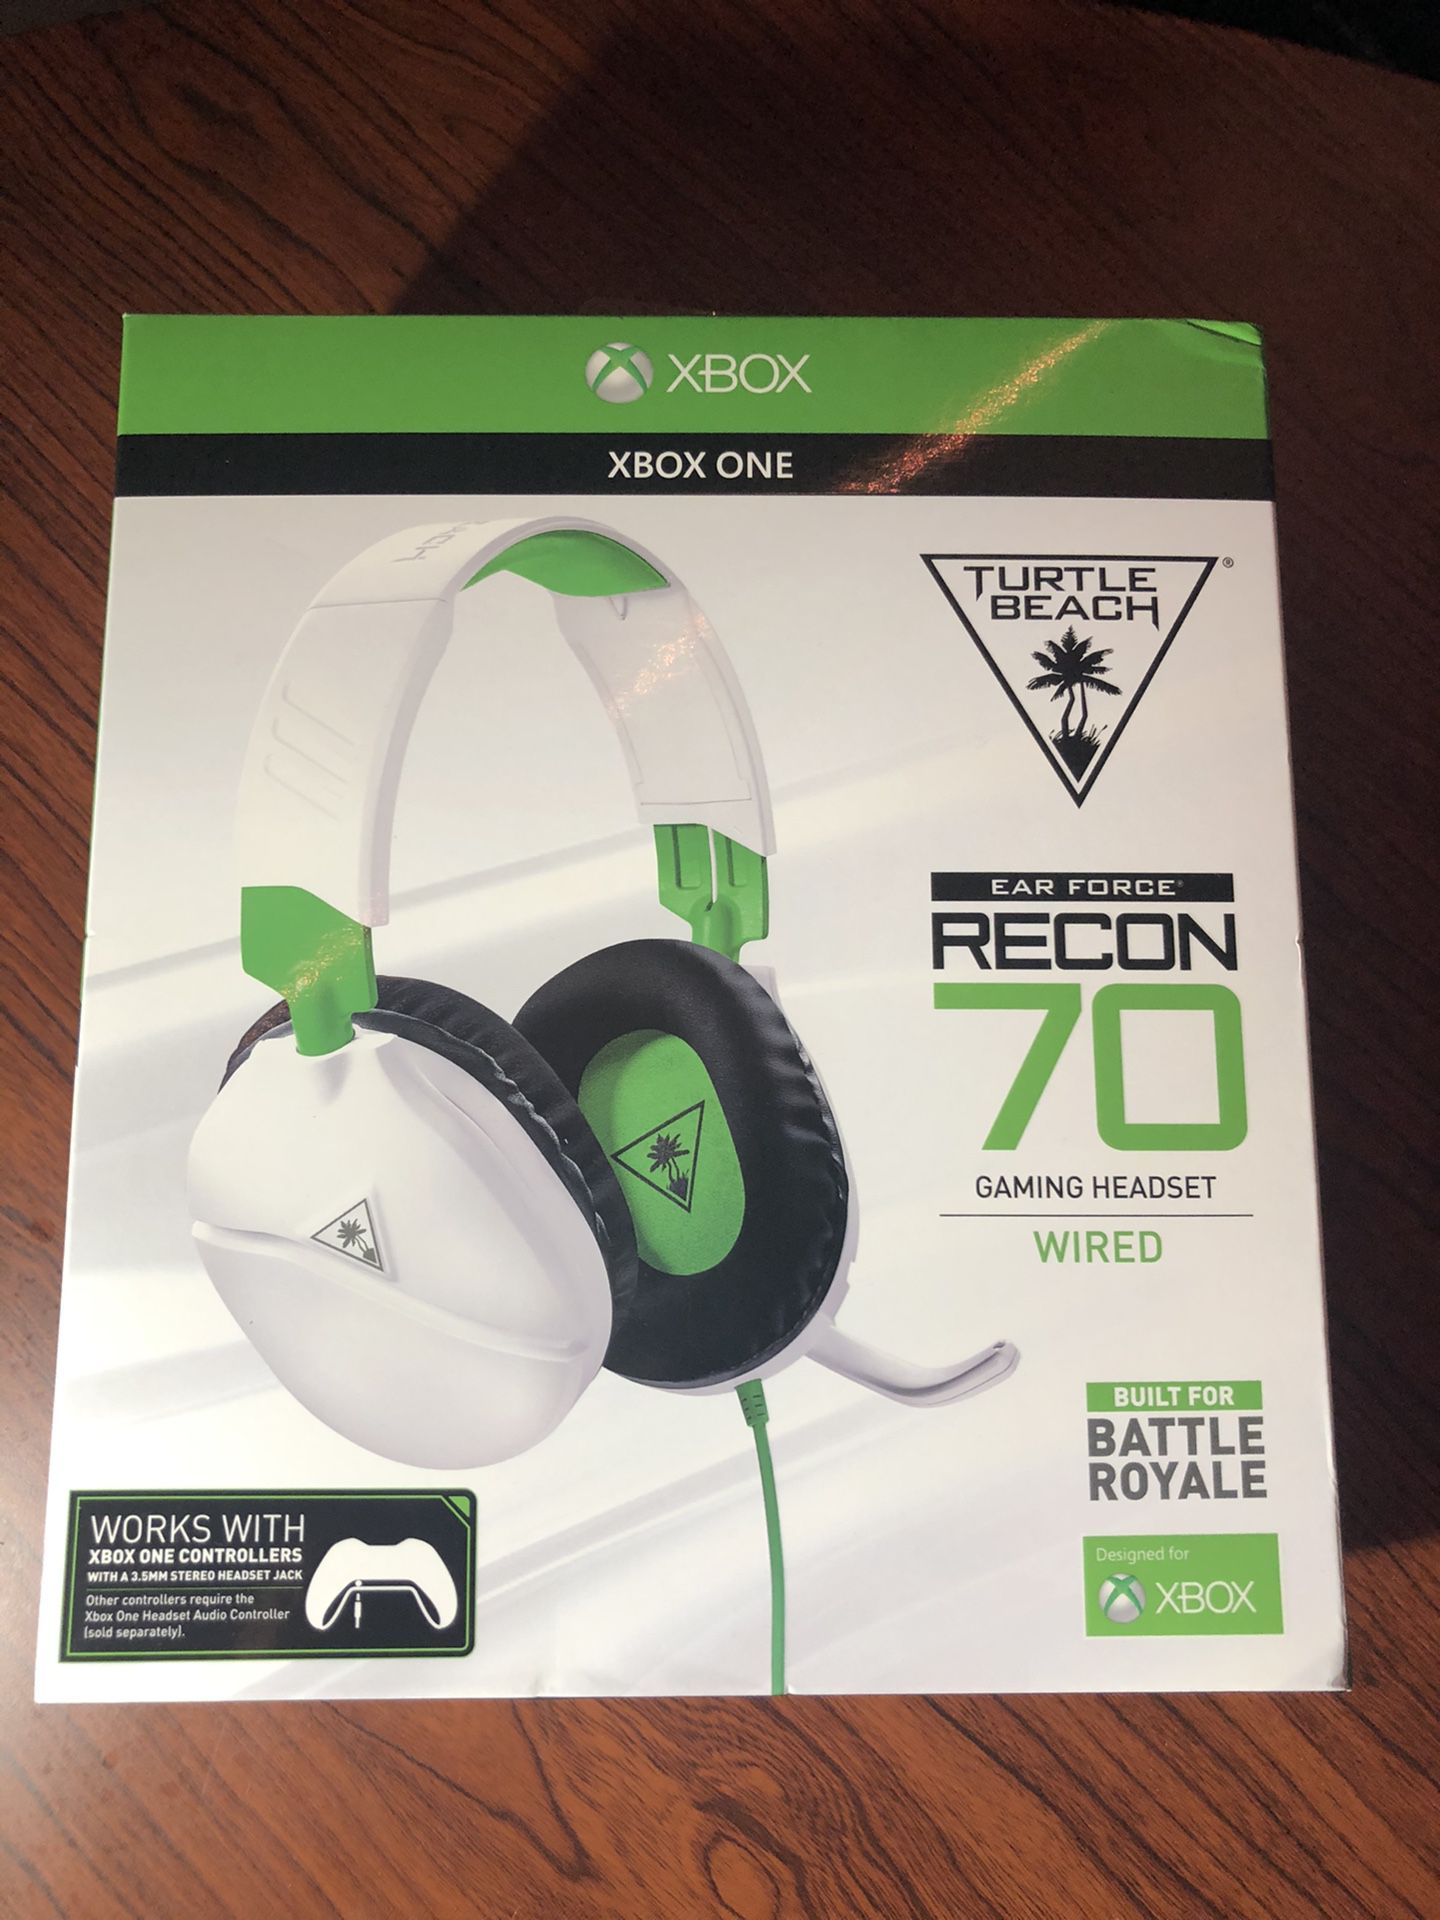 Turtle beach headsets recon 70 for xbox one , series x|s and ps4/5 and with any 3.5mm audio jack device’s